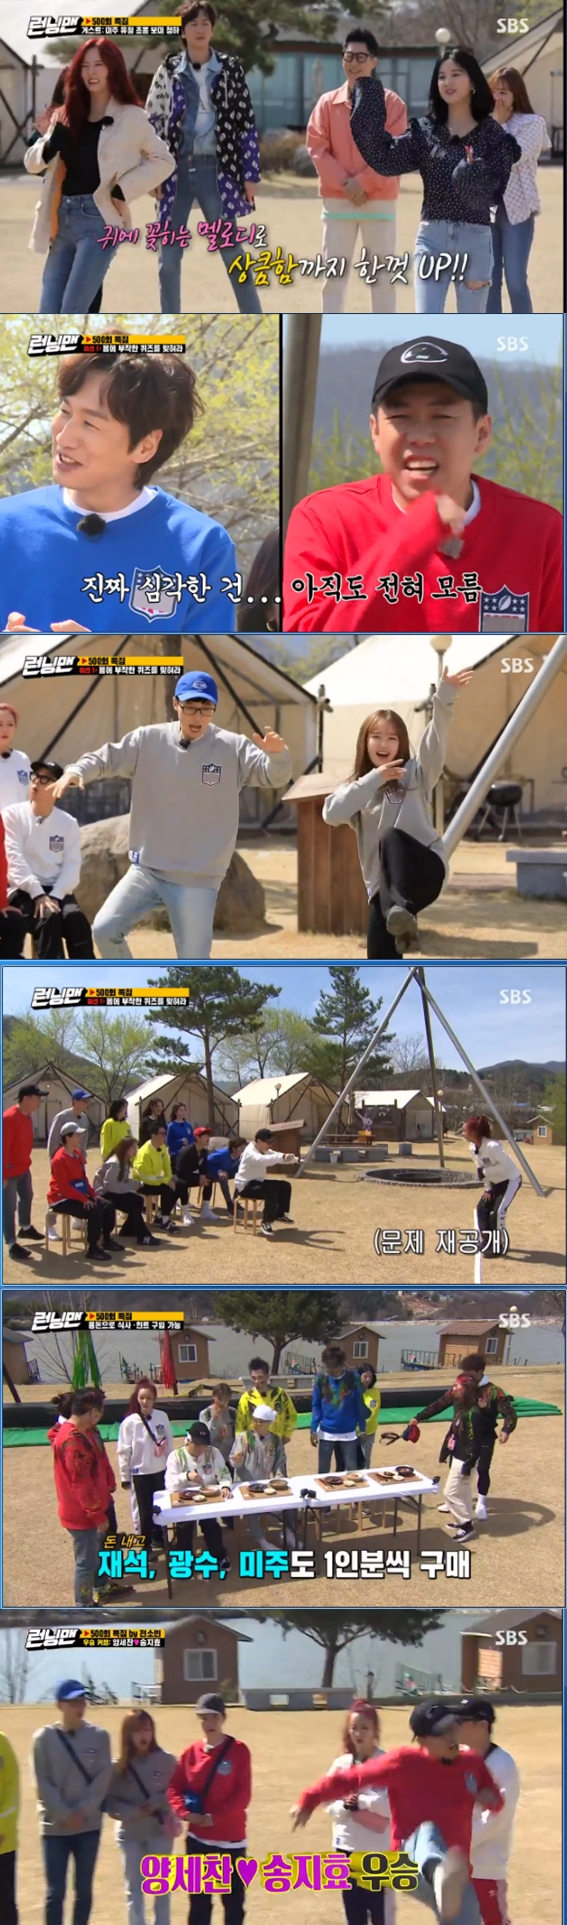 Jeon So-min also played 500 times together.On the 26th, SBS entertainment program Running Man, 500 specials were featured, and Cheongha, Yoon Bomi, Park Cho-rong, Miju, and Choi Yoo-jung came out as guests and raced with the members.For the members who gathered at the opening of the 500th special, SBS president sent coffee tea, and members including Yoo Jae-Suk gave thanks.At this time, Lee Kwang-soo bowed suddenly and bought the members original voice; Jeon So-min, who was resting with a sick body, failed to participate in the 500th special recording.Instead, there stood a lighthouse of Jeon So-min; Kim Jong-kook folded his arms around Jeon So-mins lighthouse and took her.Kim Jong-kook said, Somin is very lonely, and Yoo Jae-Suk also said, Jeon So-min does not want to hang up.Yoo Jae-Suk then laughed, saying, I have to be prepared to call the people.Members showed off their sticky companionship, genuinely worried about the health of Jeon So-min.Yoo Jae-Suk interviewed Choi Yoo-jung and praised him for saying, I used to have cute images, but now Im mature.Lee Kwang-soo said, I heard that I was shooting a drama recently.Yoo Jae-Suk said, It is not the timing now. After blocking Lee Kwang-soos words, he asked Choi Yoo-jung the same question and laughed.Yoo Jae-Suk asked Park Cho-rong, What did you talk to the members after the last recording of Miwoosae? And raised the expectation of Kim Jong-kook and Yang Se-chan.However, Park Cho-rong was worried for a while and then replied, I just finished recording the mike and just dangled.Yoo Jae-Suk asked, Did you really say anything?Park Cho-rong told Yang Se-chan, Didnt your brother like Na Eun-eun? which baffled him.As the members continued to drive, Yang Se-chan said, I do not like it or hate it.In this weeks Race, the limited express chef continued to prepare the dishes for the team that won each mission: the first mission was to get the quiz attached to the body.Choi Yoo-jung, who became the first speaker, struggled to see the same issue, Yoo Jae-Suk, and Yoo Jae-Suk got the right answer and got the score.Lee Kwang-soo and Park Cho-rong succeeded in stealing the correct answer in the turn of Qing.The answer was the horn, and to Lee Kwang-soo, who was sorry, Yoo Jae-Suk laughed, saying, You do not know anyway.Kim Jong-kook also scored the right answer for Haha and Yoon Bomi teams.However, the Yoo Jae-Suk team won the game by stealing most of the correct answers every time the other team got the problem and the Yoo Jae-Suk got the right answer.The first quiz match resulted in a chance to take away the pocket money from other teams, including the Yoo Jae-Suk team, who won the first prize, and the Kim Jong-kook team and the Ji Suk-jin team who won the second and third prizes.The Yoo Jae-Suk team stole all 100,000 won from the Haha team tent because they knew that Haha team had hidden all the money in one place.Kim Jong-kook also went to the tent of the Ji Suk-jin team and stole 67,000 won.The food on the second mission, Im Going to Save Now, was a double bibim noodle; Kim Jong-kook and Lee Kwang-soo set a good record in the first showdown.However, the crew gave them a chance to renew the record, and in the second showdown, the women climbed to the conveyor belt.The first team to win the rematch was Haha and Bomi; the second and third were won by Kim Jong-kook and Lee Kwang-soo.Haha, who lost 100,000 won to the Yoo Jae-Suk team in the first mission, searched the tent of the Yoo Jae-Suk team to get revenge but could not find pocket money.The final mission was a frontal match between one greedy and the rest of the members, who did not know who greedy was, went to the hints, careful to hit each others name tags.The hints the members found pointed to Kim Jong-kook, and Yoon Bomi had a name tag for Kim Jong-kook.But Kim Jong-kook was not a greedy man, and the members fell into a menbung.The night of the continual greedy people ripped the name tags from the greedy one by one. The greedy person who confused the members was Jeon So-min.Upon learning of this, Haha, Yang Se-chan, Yoon Bomi and Park Cho-rong acquired the vault Password behind the lighthouse of Jeon So-min.But it was Yang Se-chan who opened the safe door.